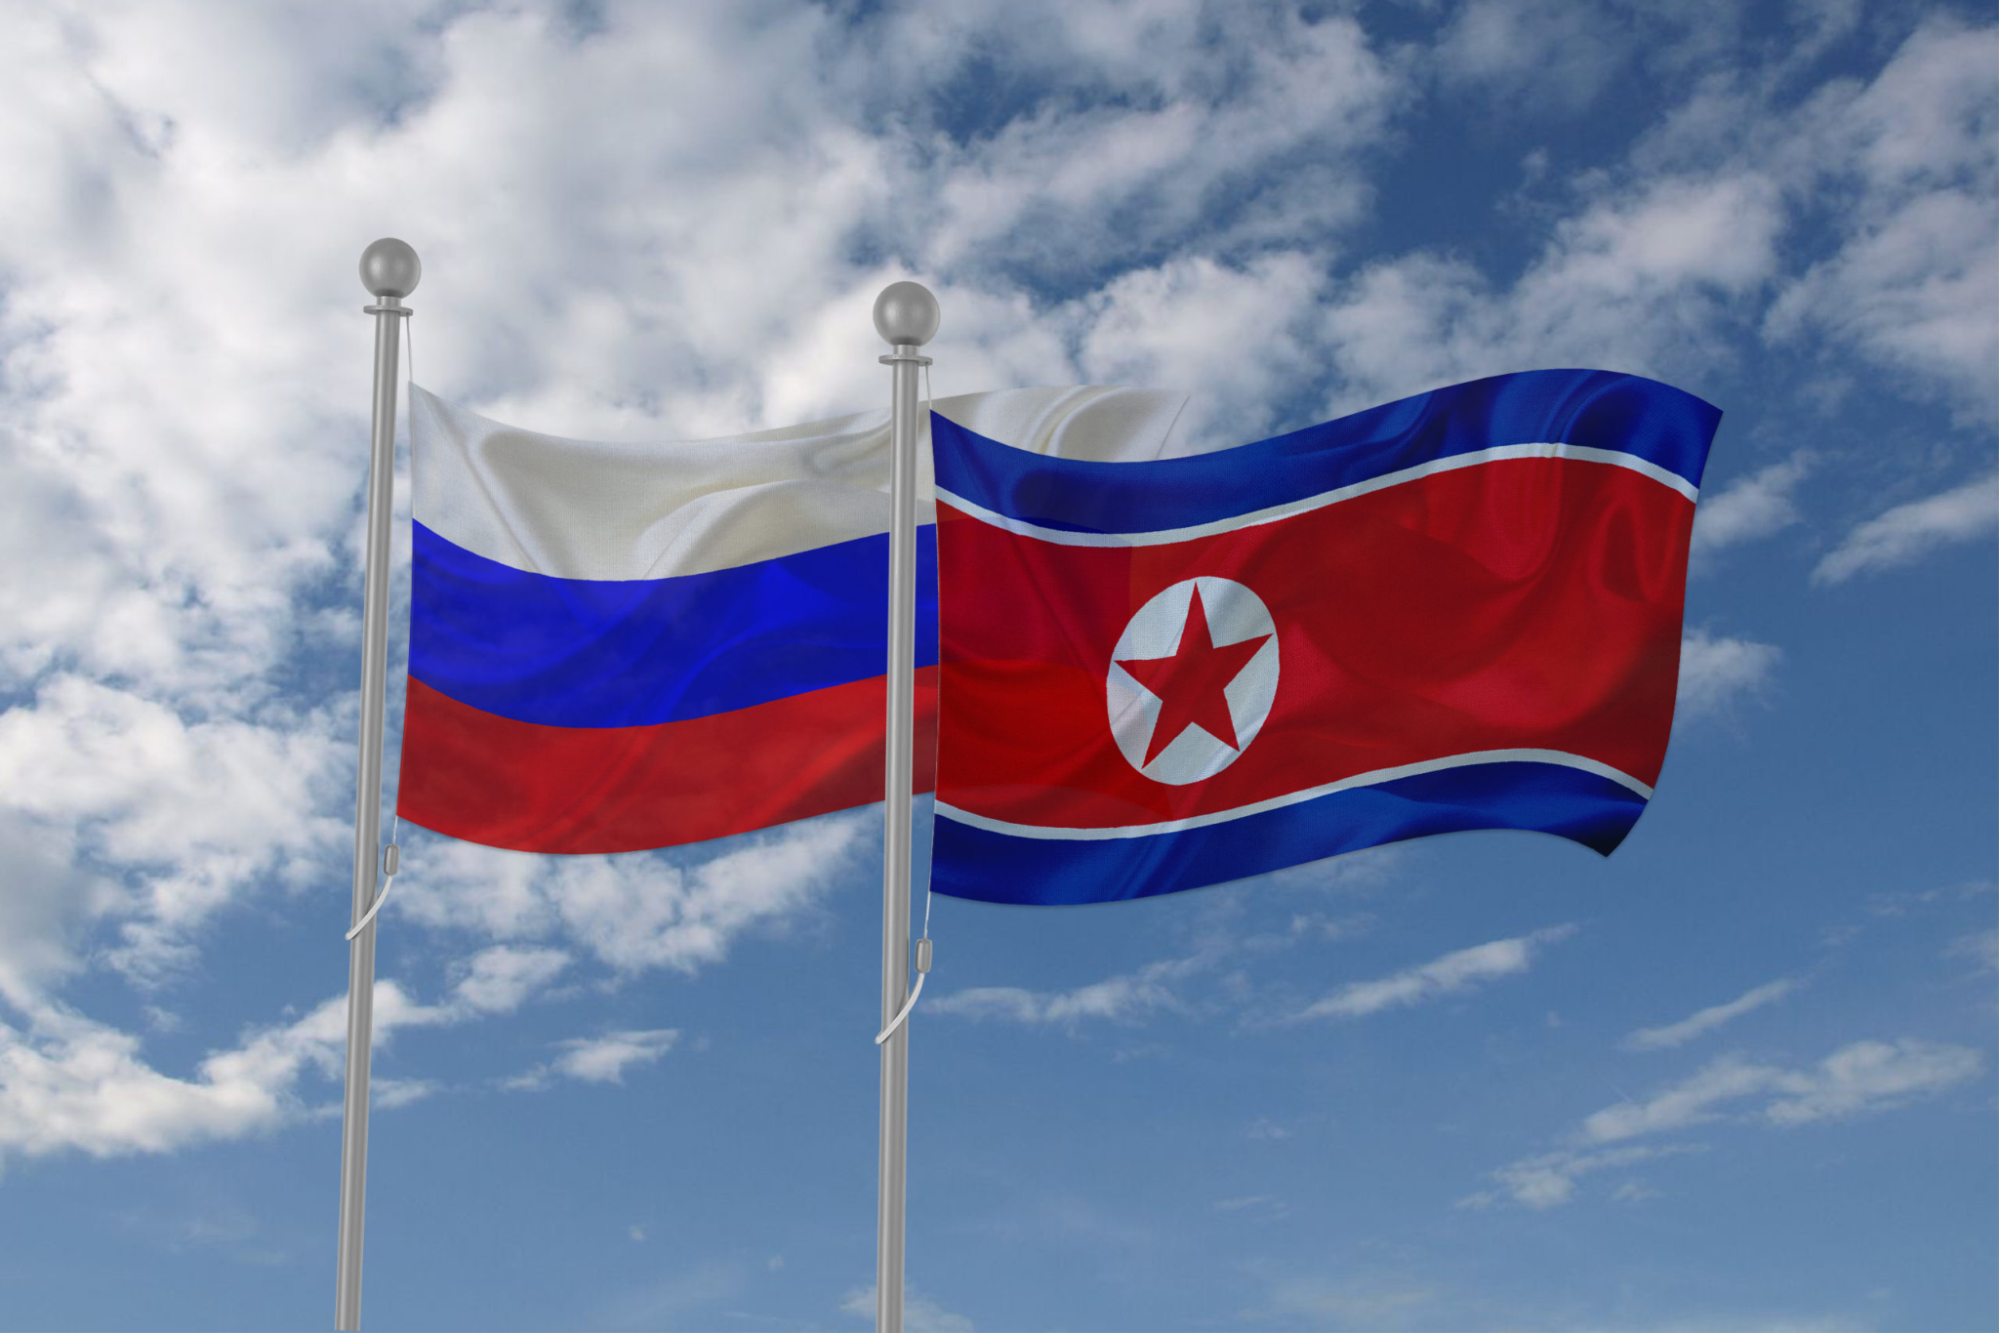 A New Dawn in North Korea: Russian Tourists to Break Pandemic Isolation